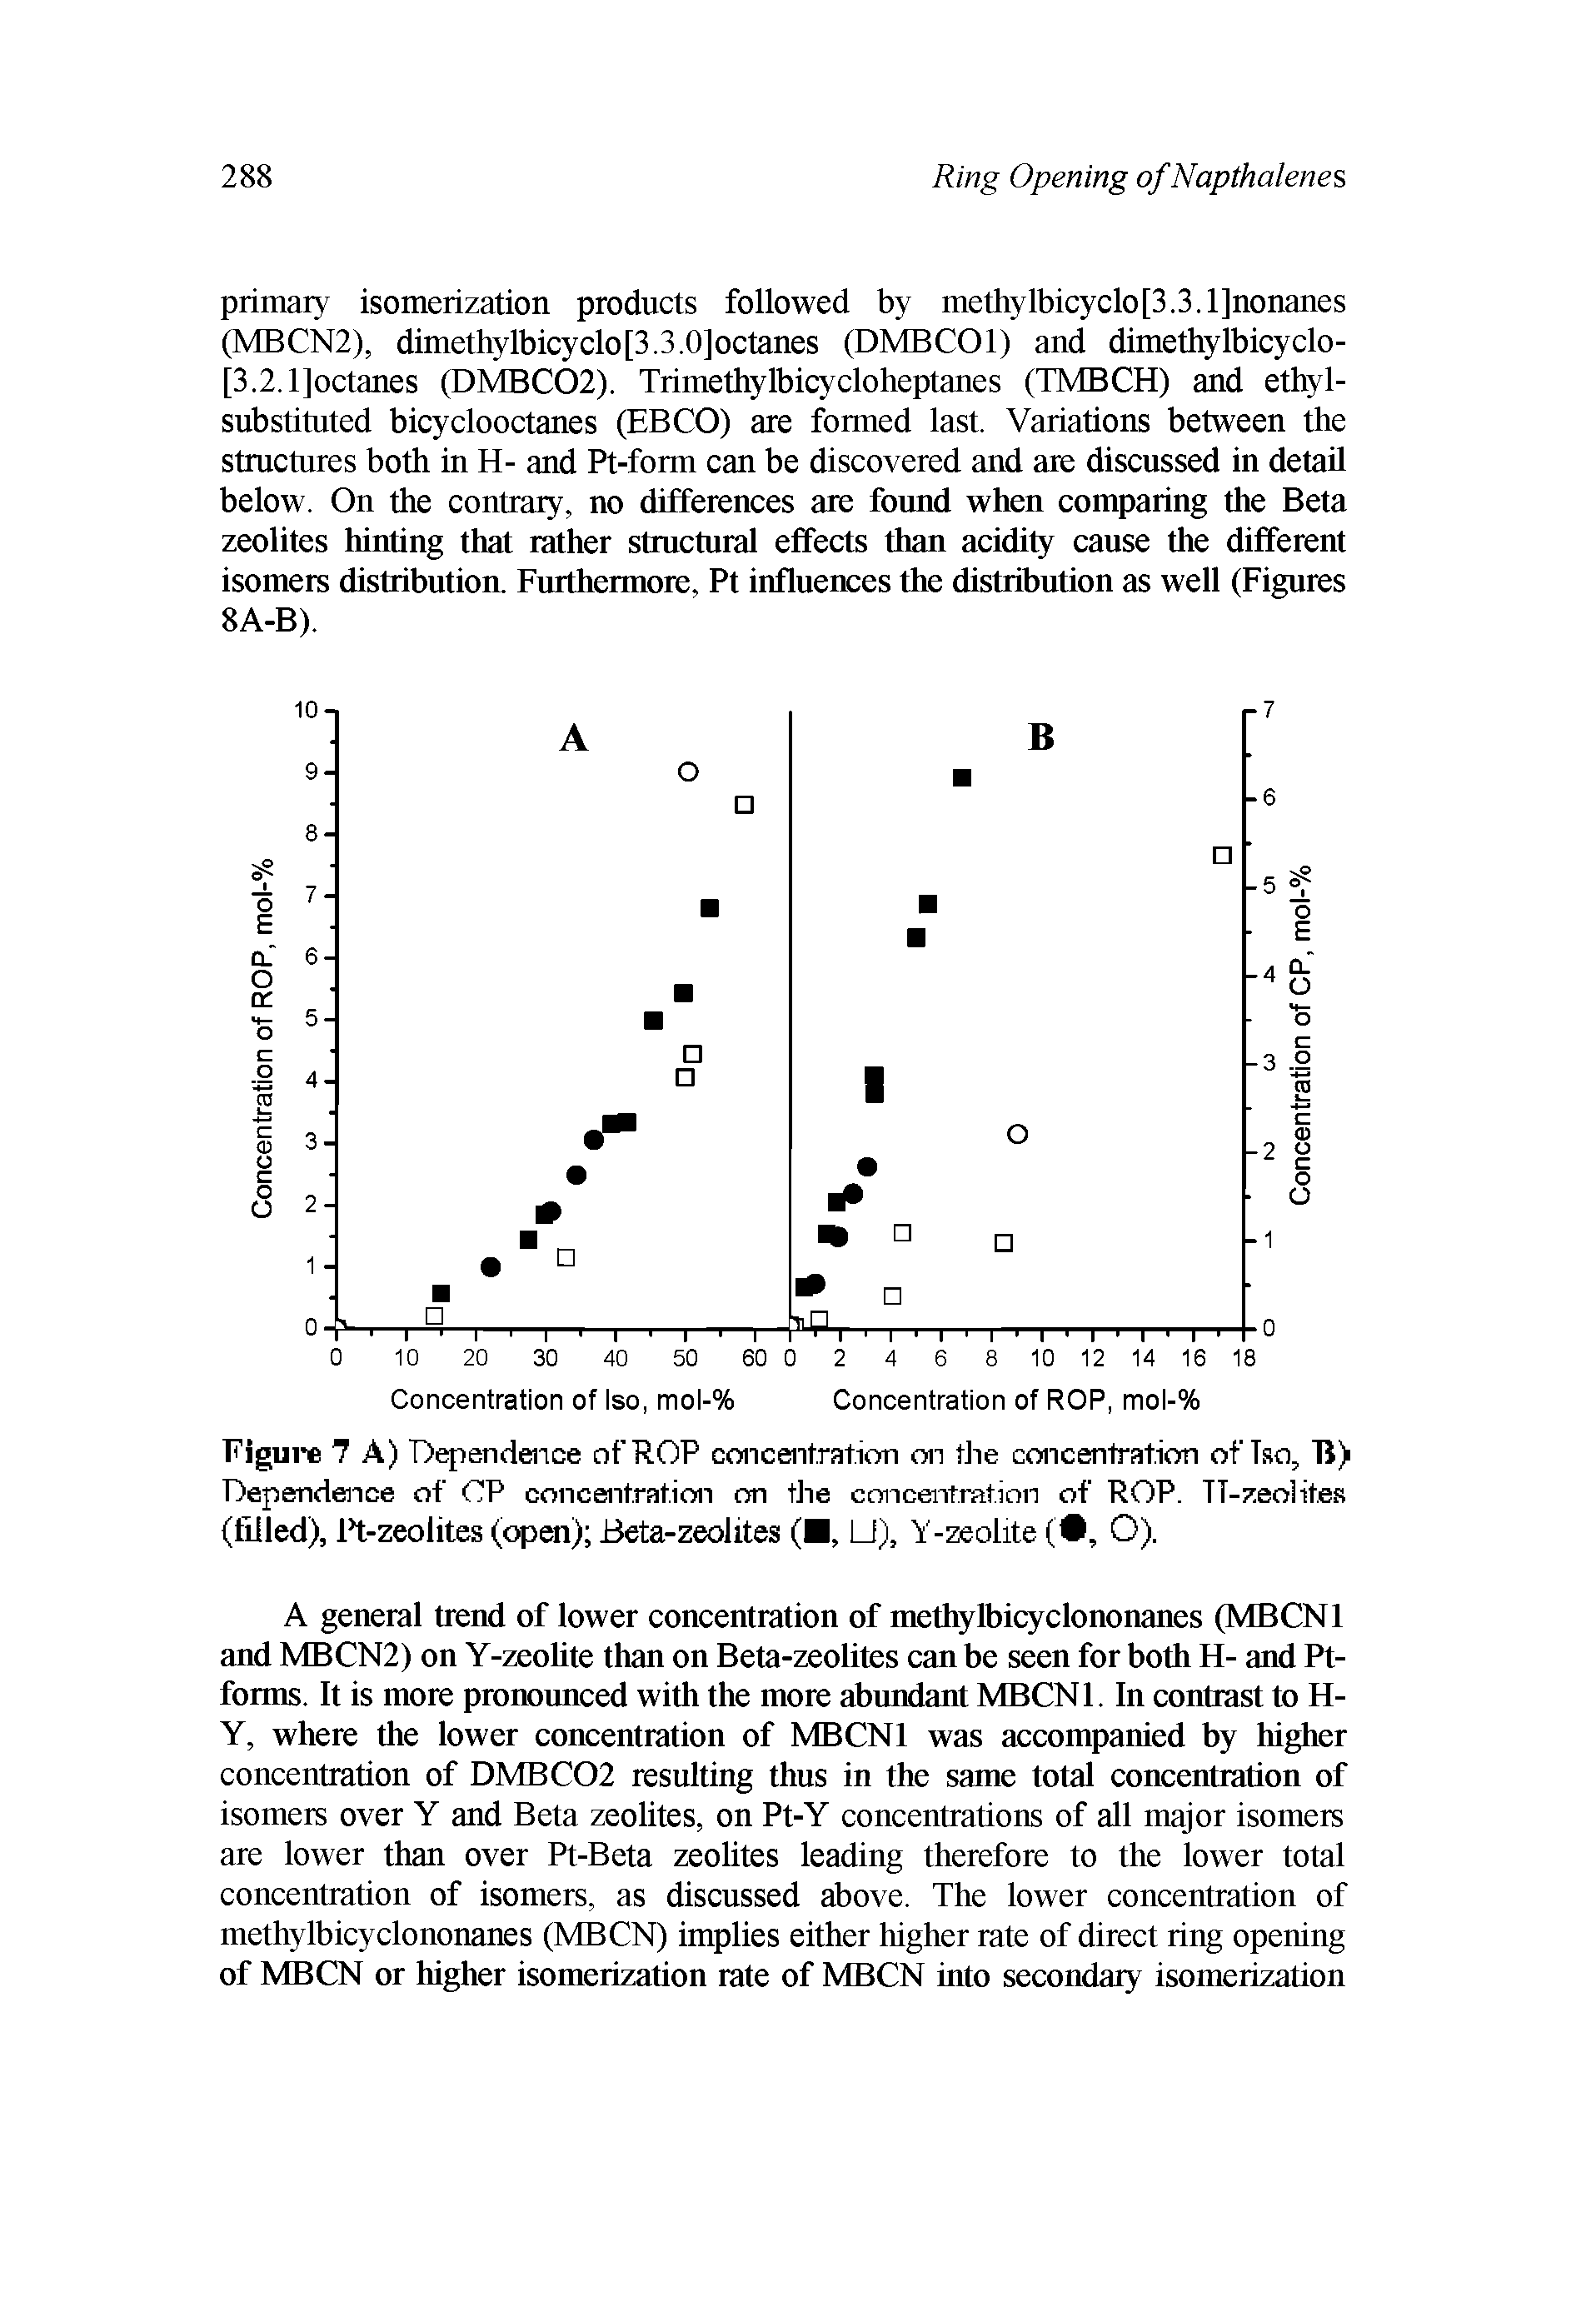 Figure 7 A) Dependence ofROP concentration on the concentration of Tso, B) Dependence of OP concentration on the concentration of ROP. TT-zeolites (filled), Pt-zeolites (open) Beta-zeolites ( , U), Y-zeolite ( , O).